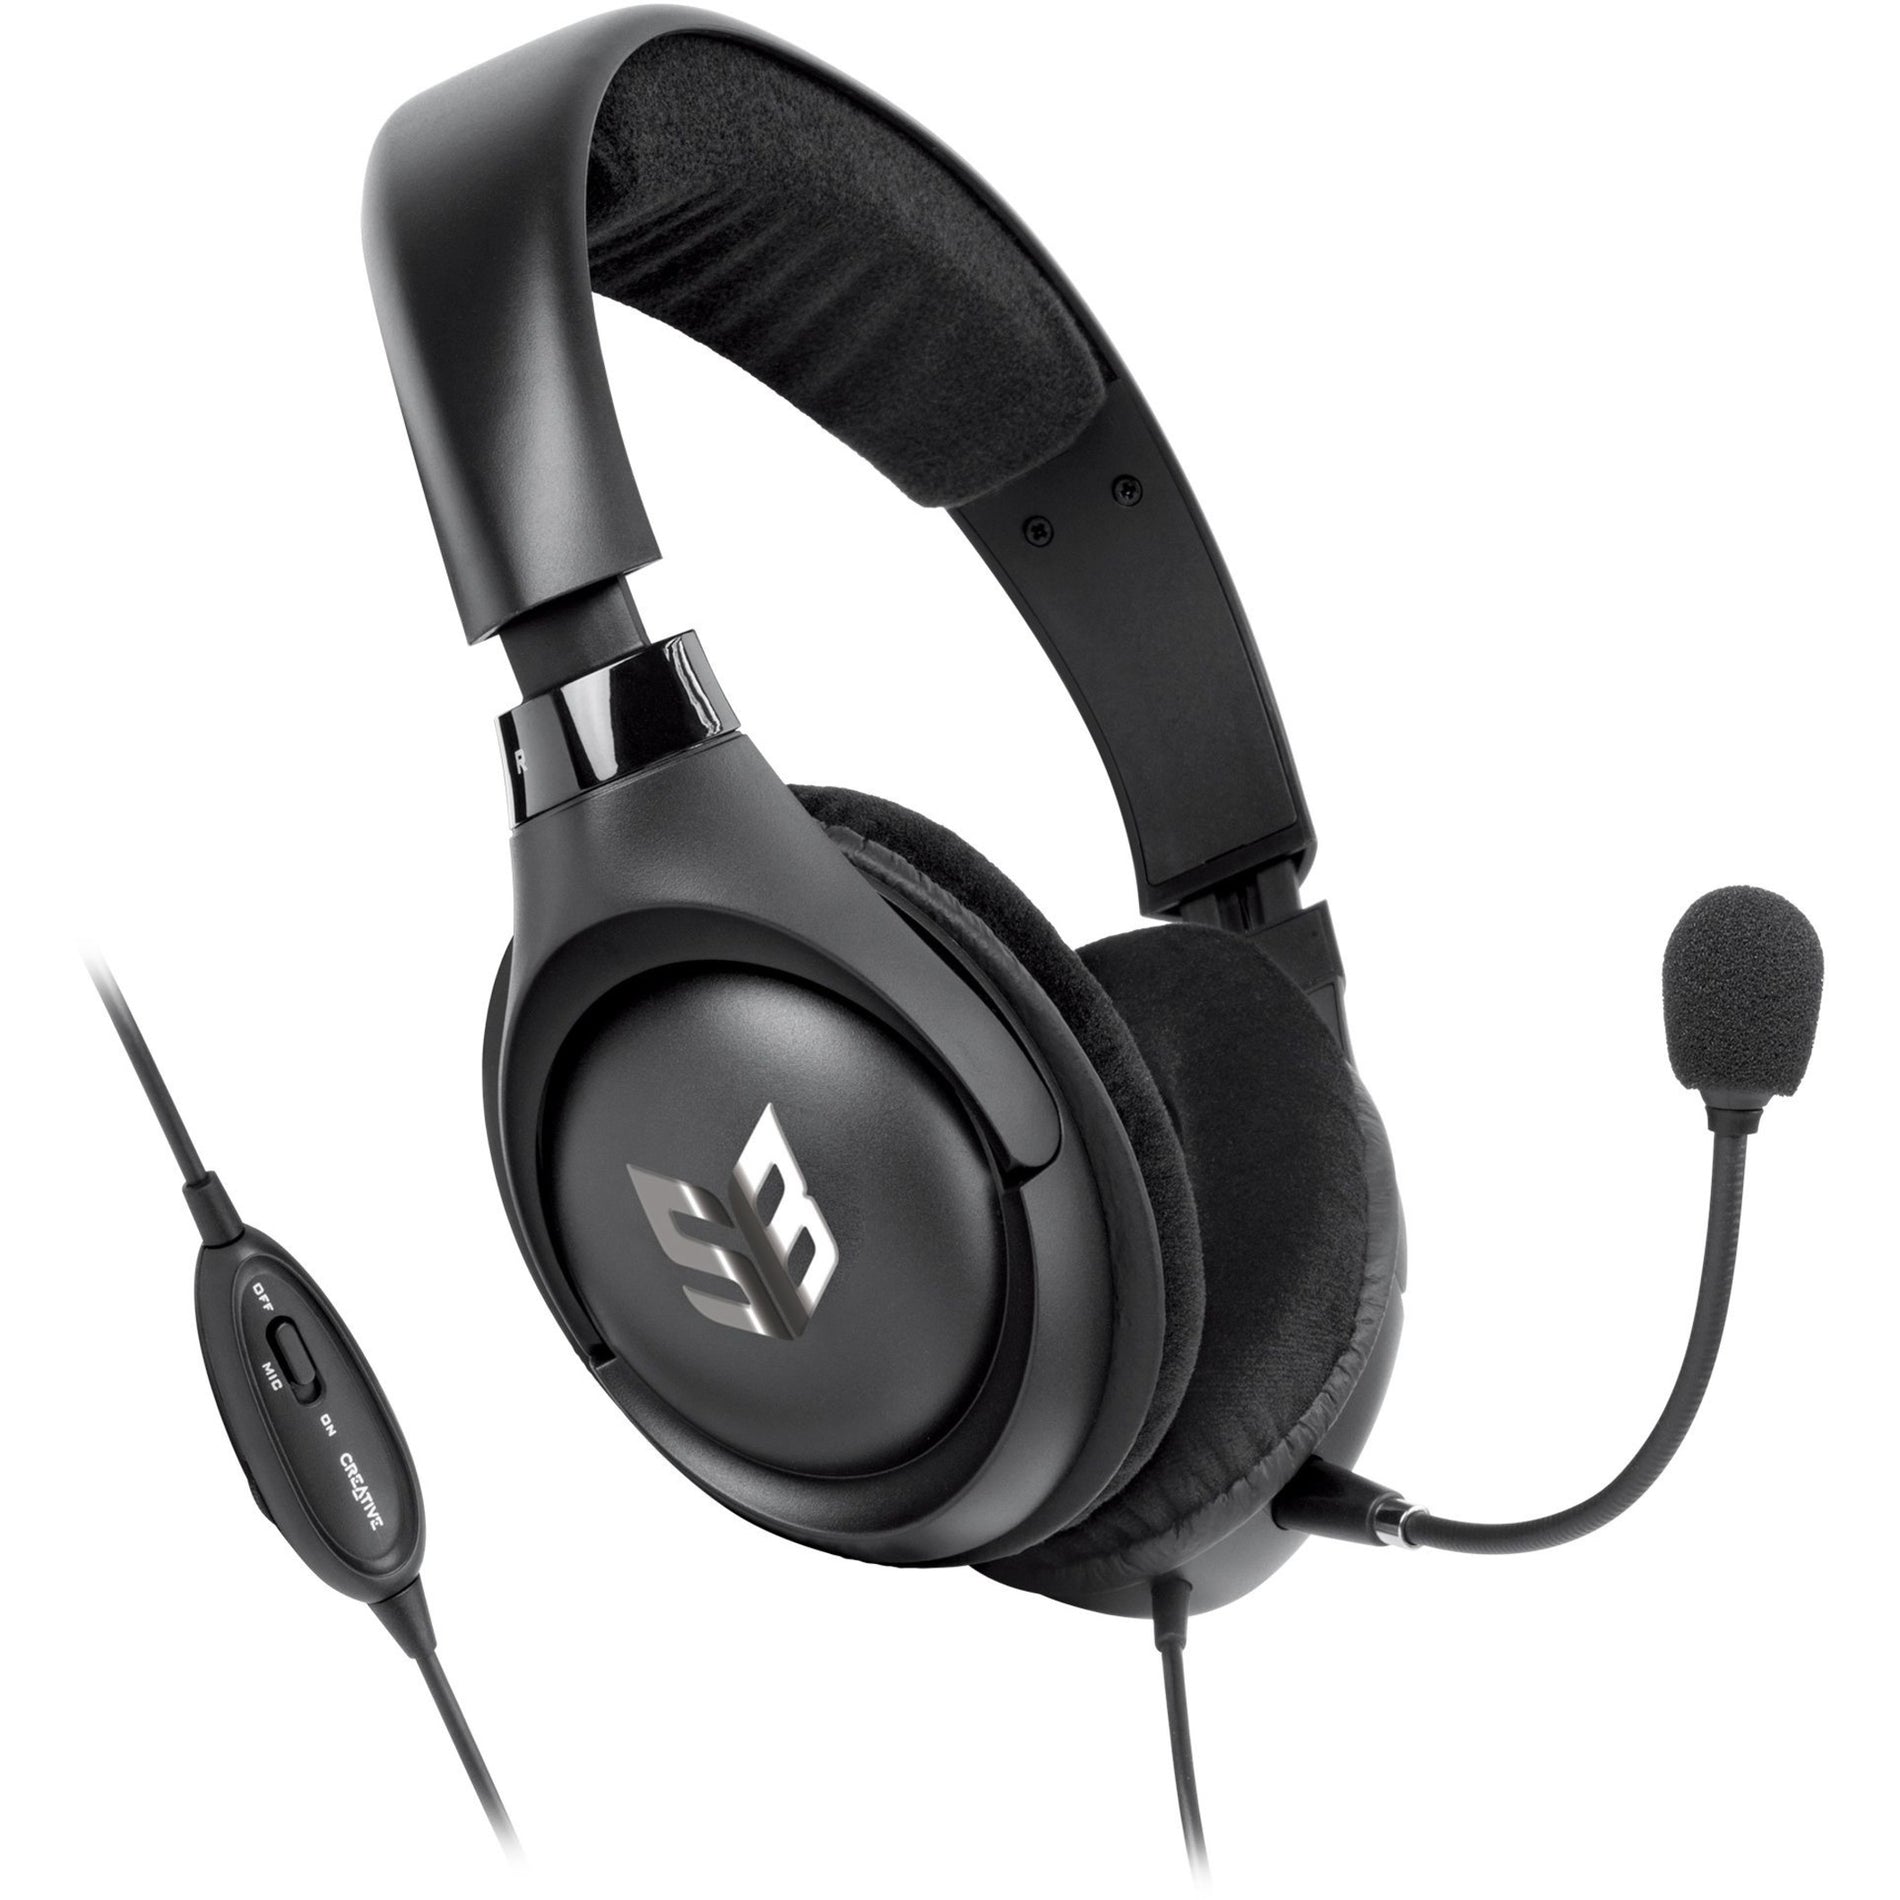 Sound Blaster 70GH032000001 Blaze V2 Gaming Headset, Stereo Sound, Noise Cancelling Microphone, Comfortable and Lightweight